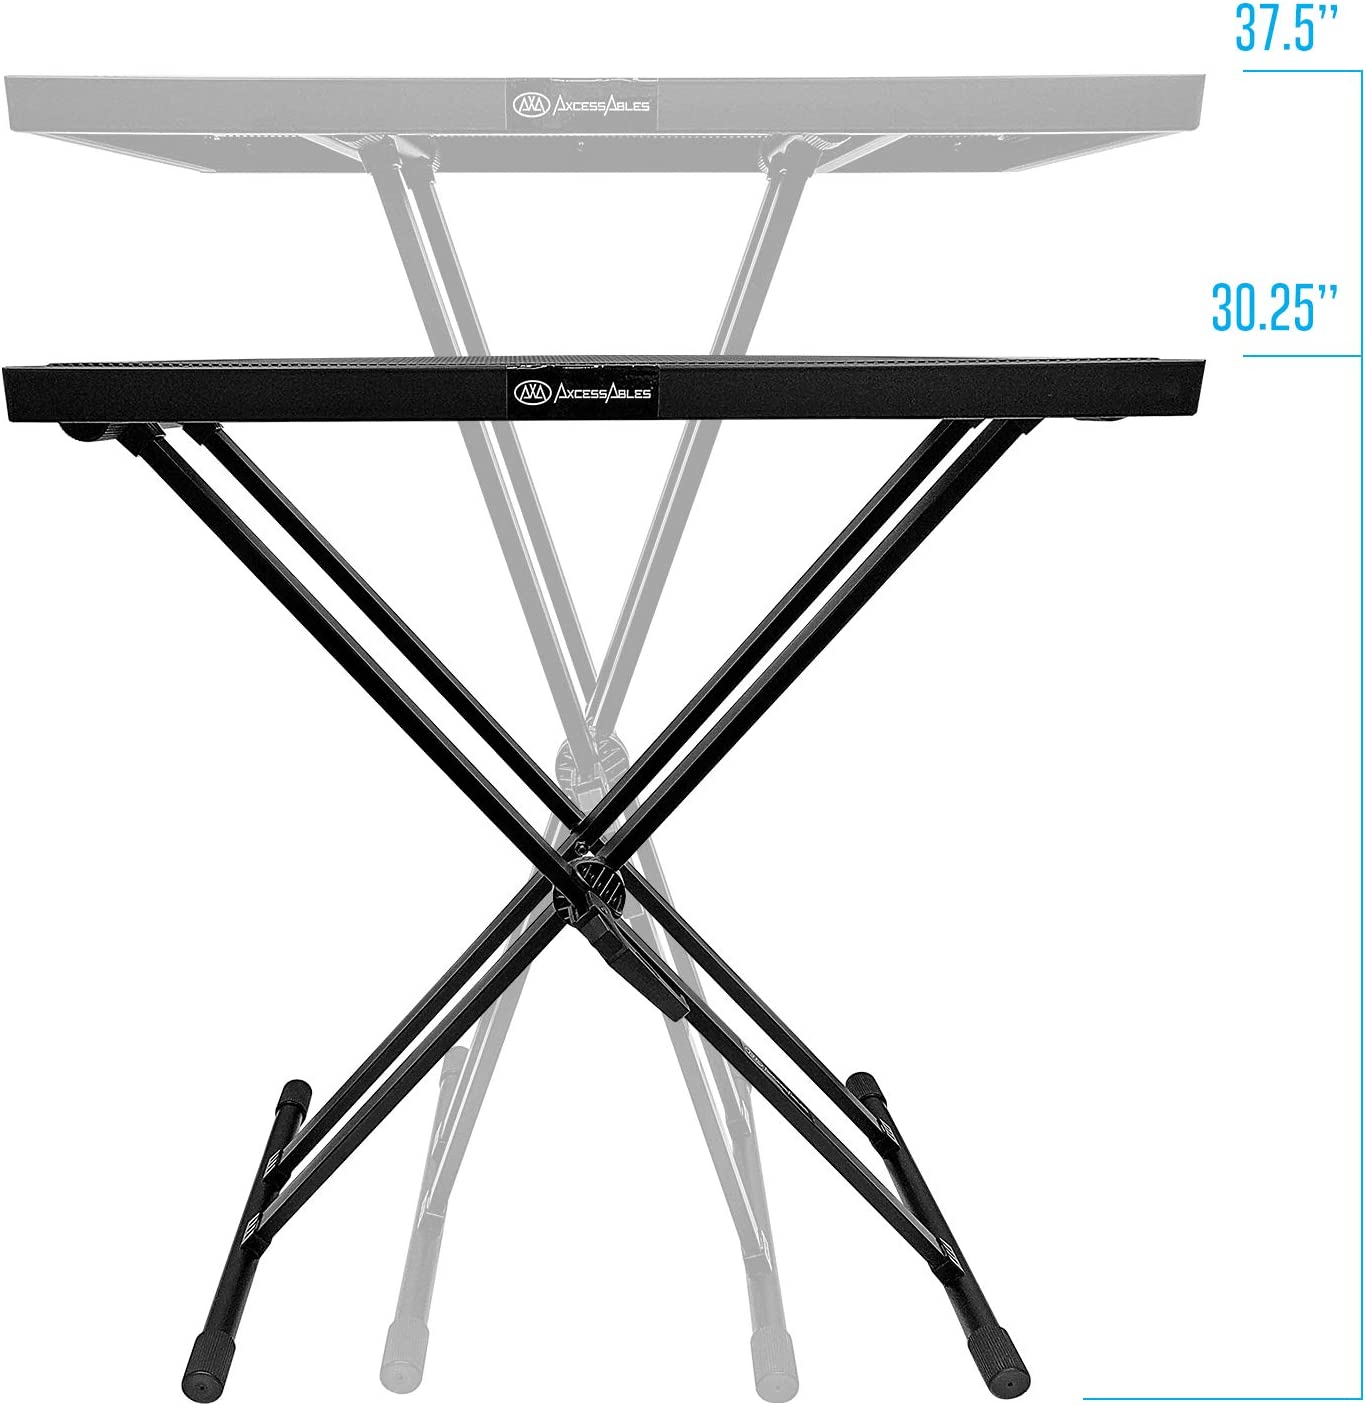 AxcessAbles MTS-01 Portable DJ Table Stand with Double-X Braced Keyboard Stand, Media Table Tray and Carry Bag - Open Box